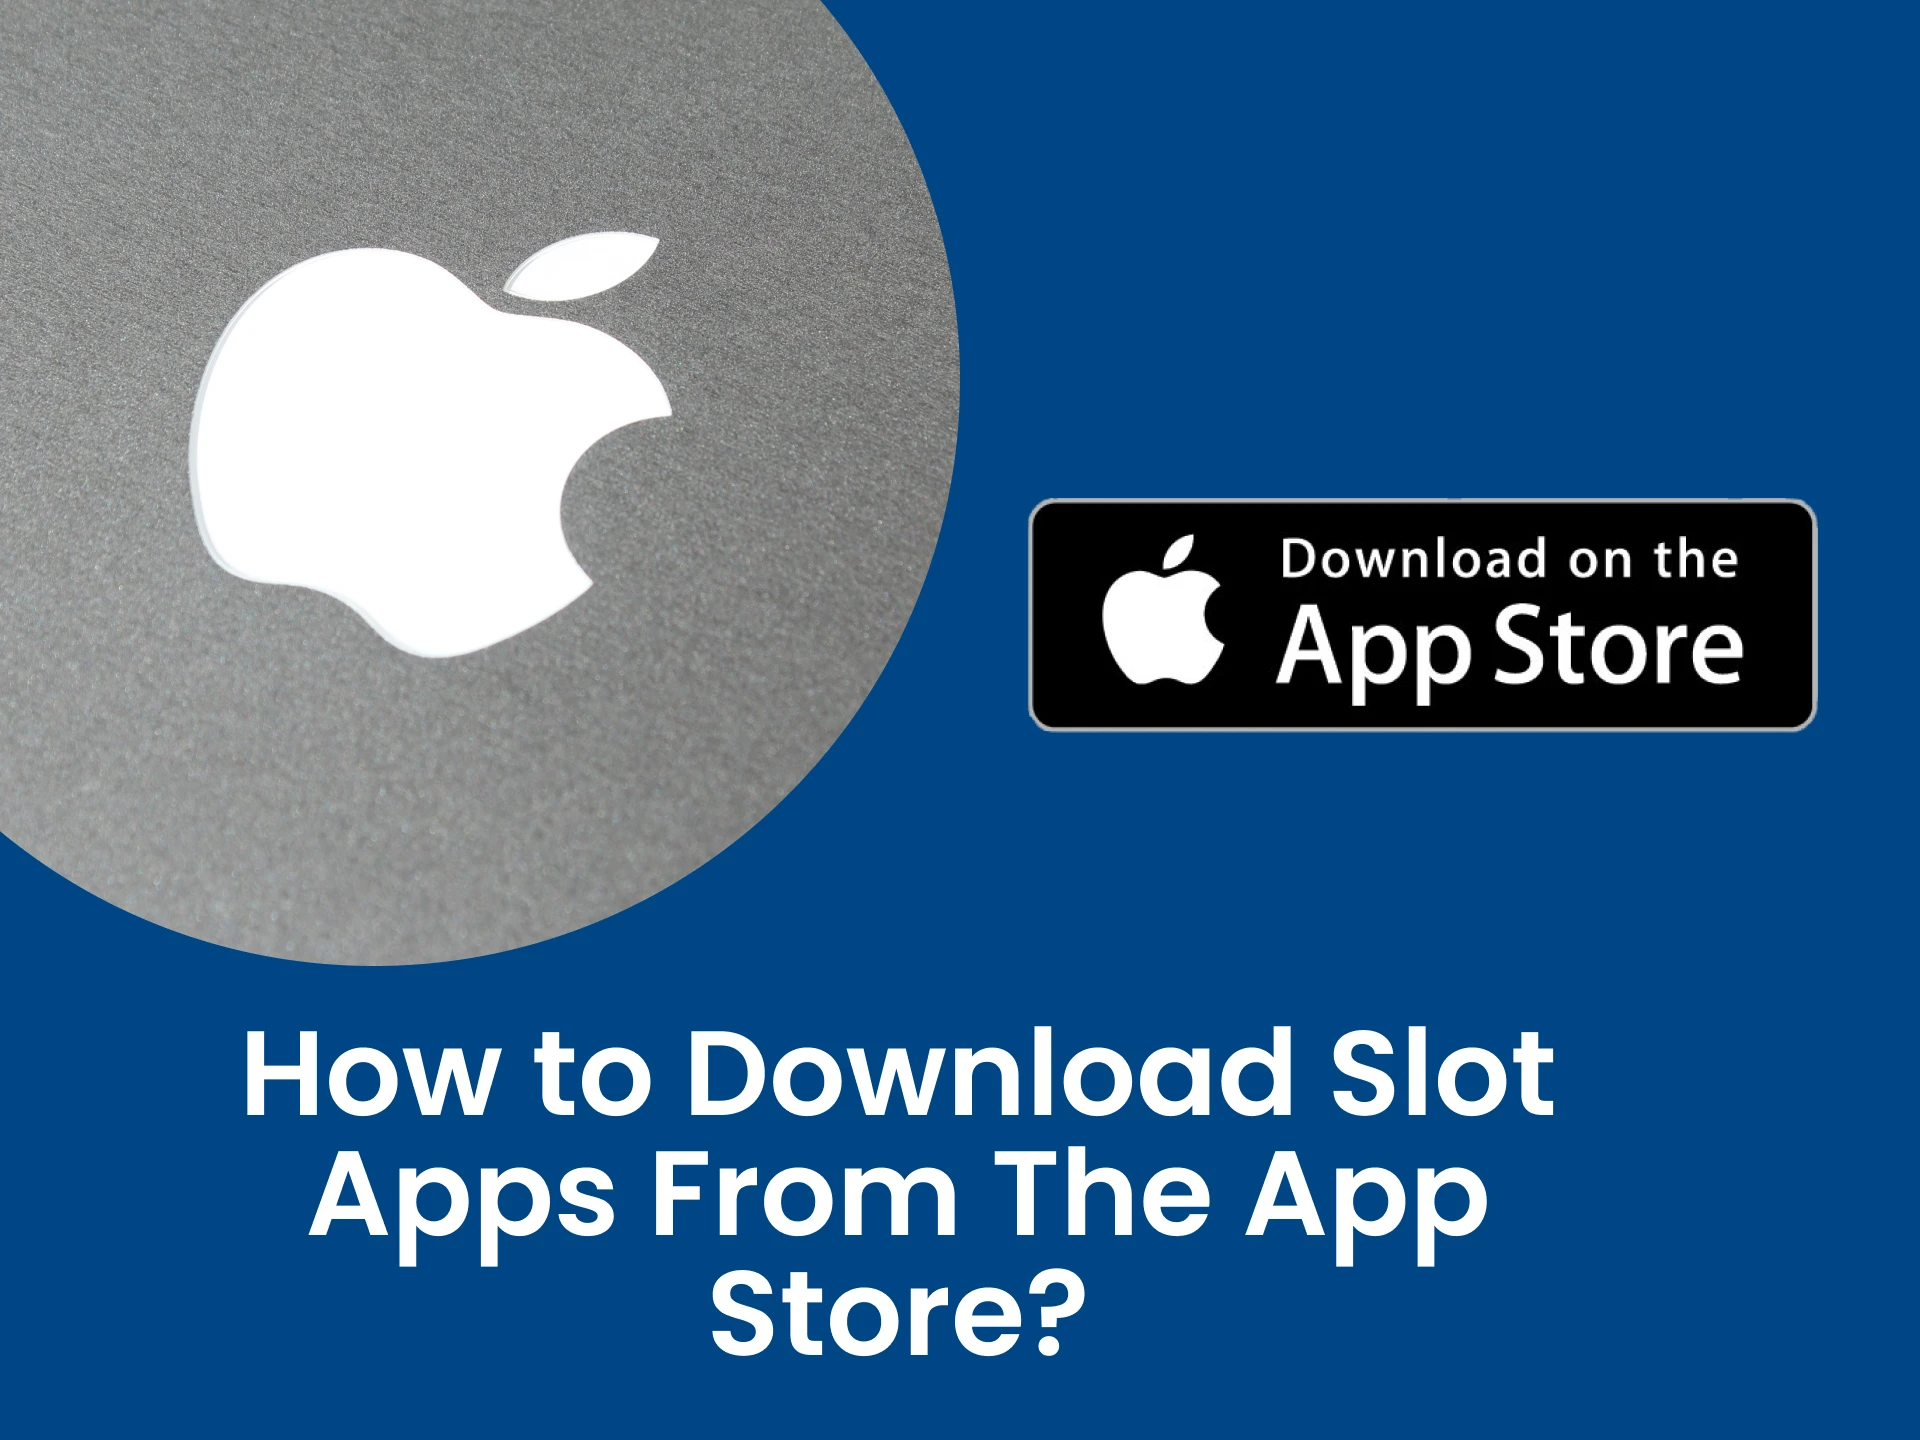 Download apps to play slots on your iPad from the App Store.